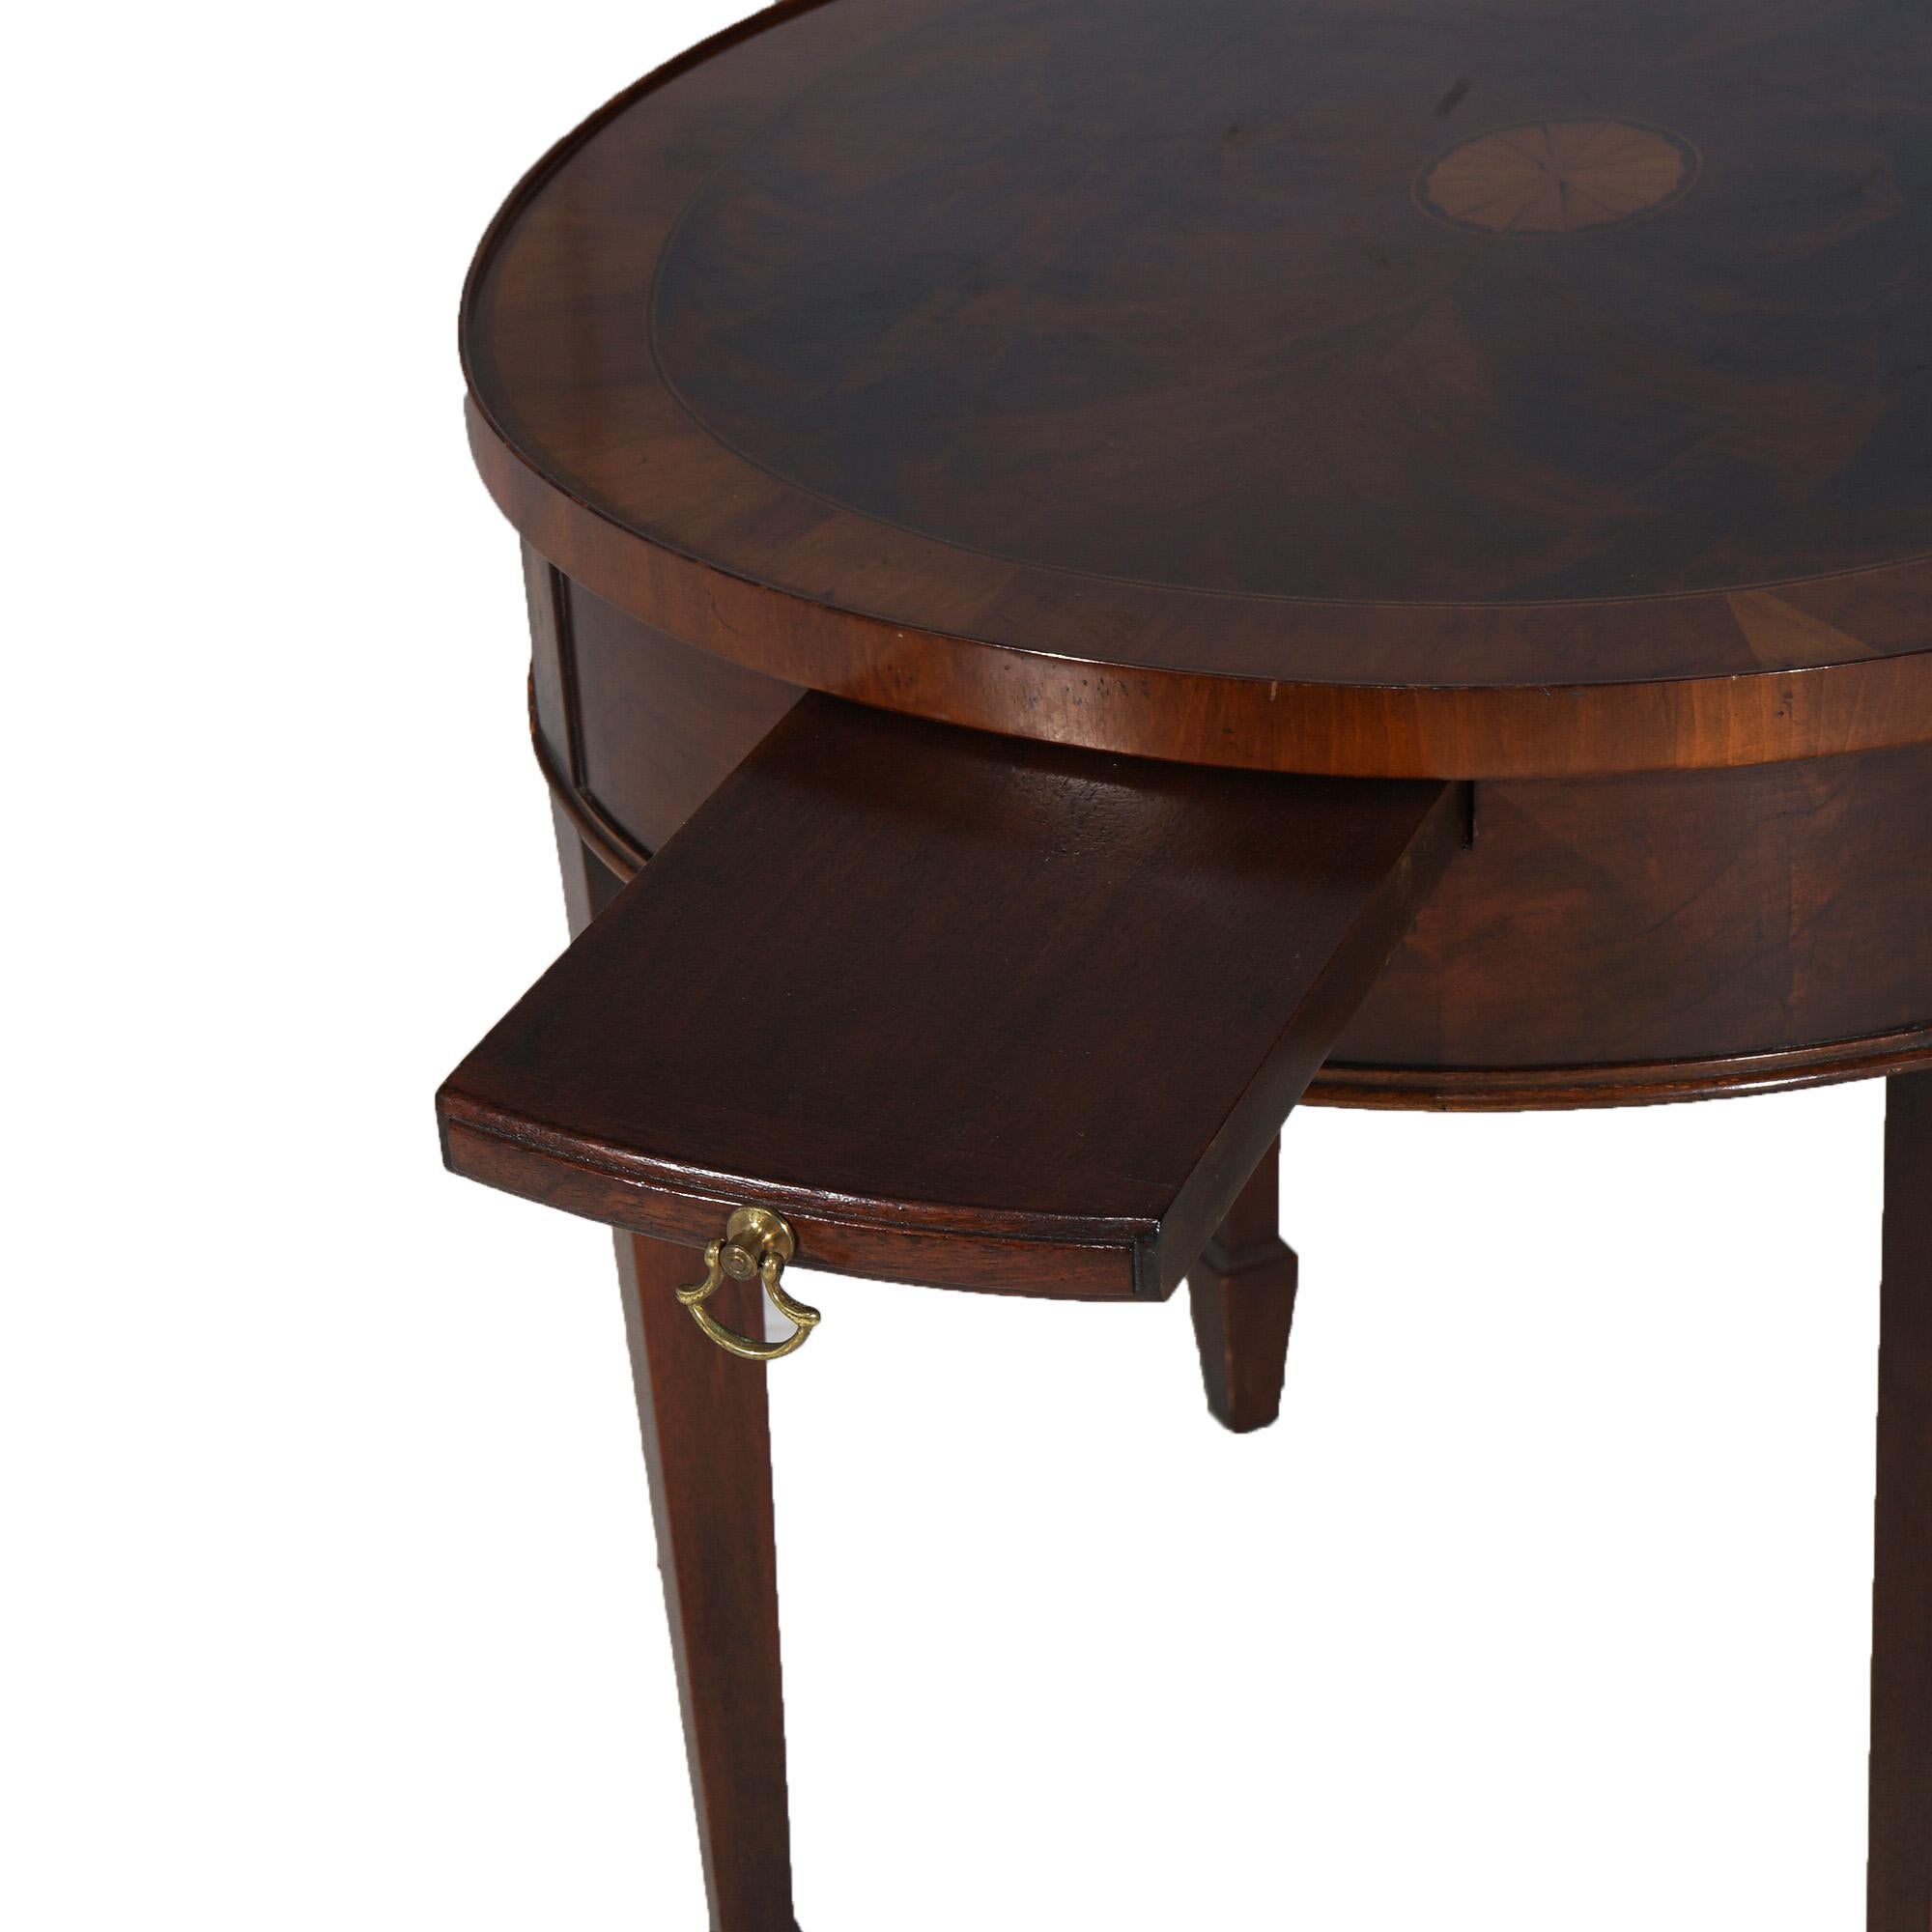 20th Century Hekman Copley Style Flame Mahogany & Satinwood Inlaid Side Table C1930 For Sale